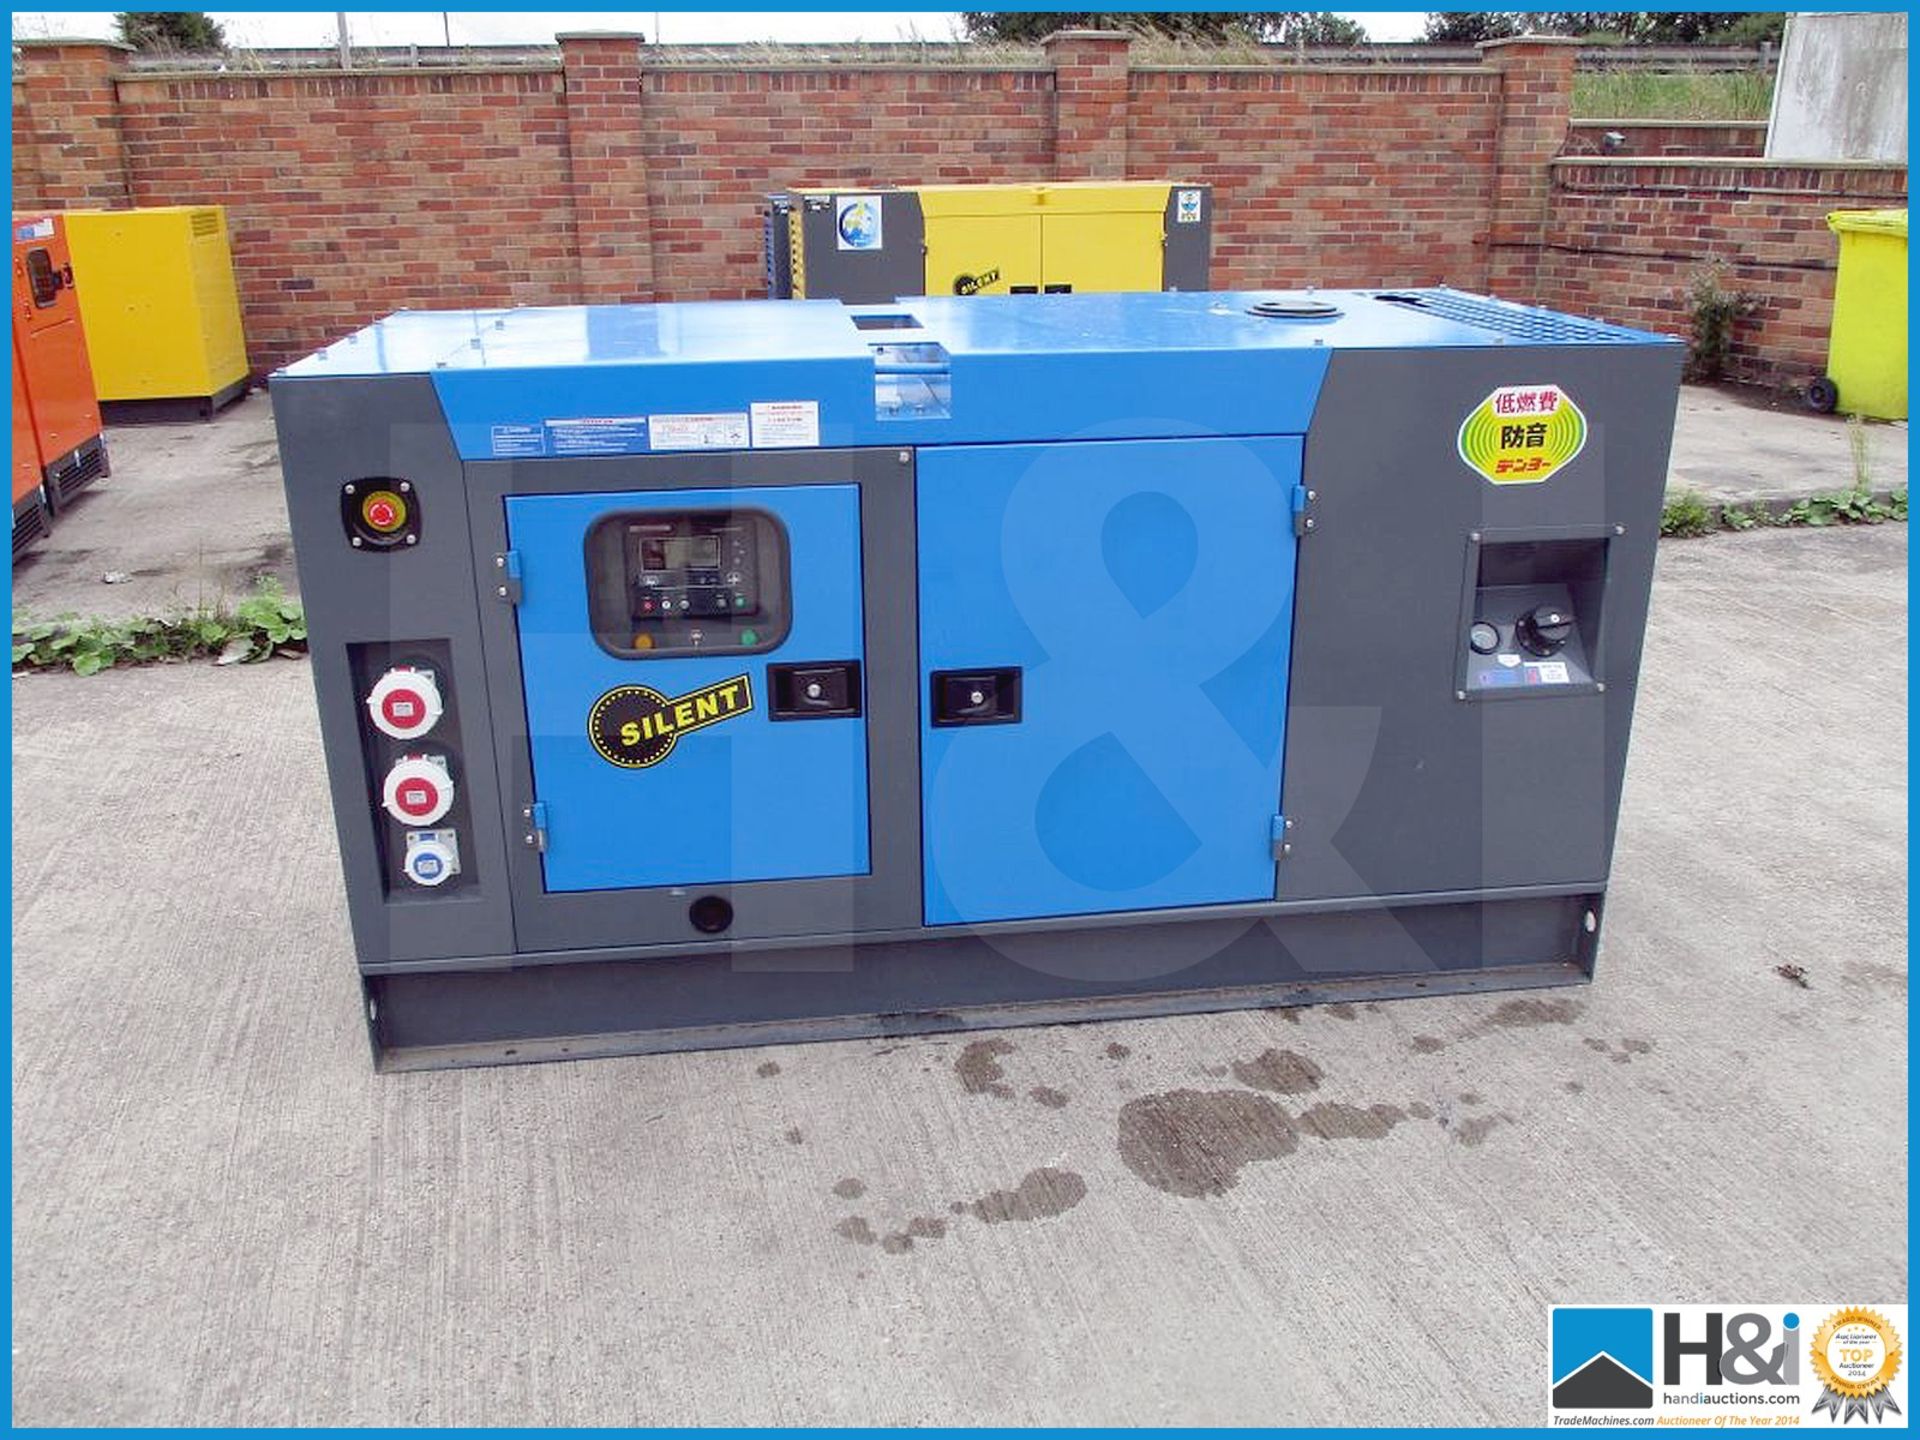 Brand new, unused Ashita 60KvA diesel generator. No oil or water and ready for transportation. Singl